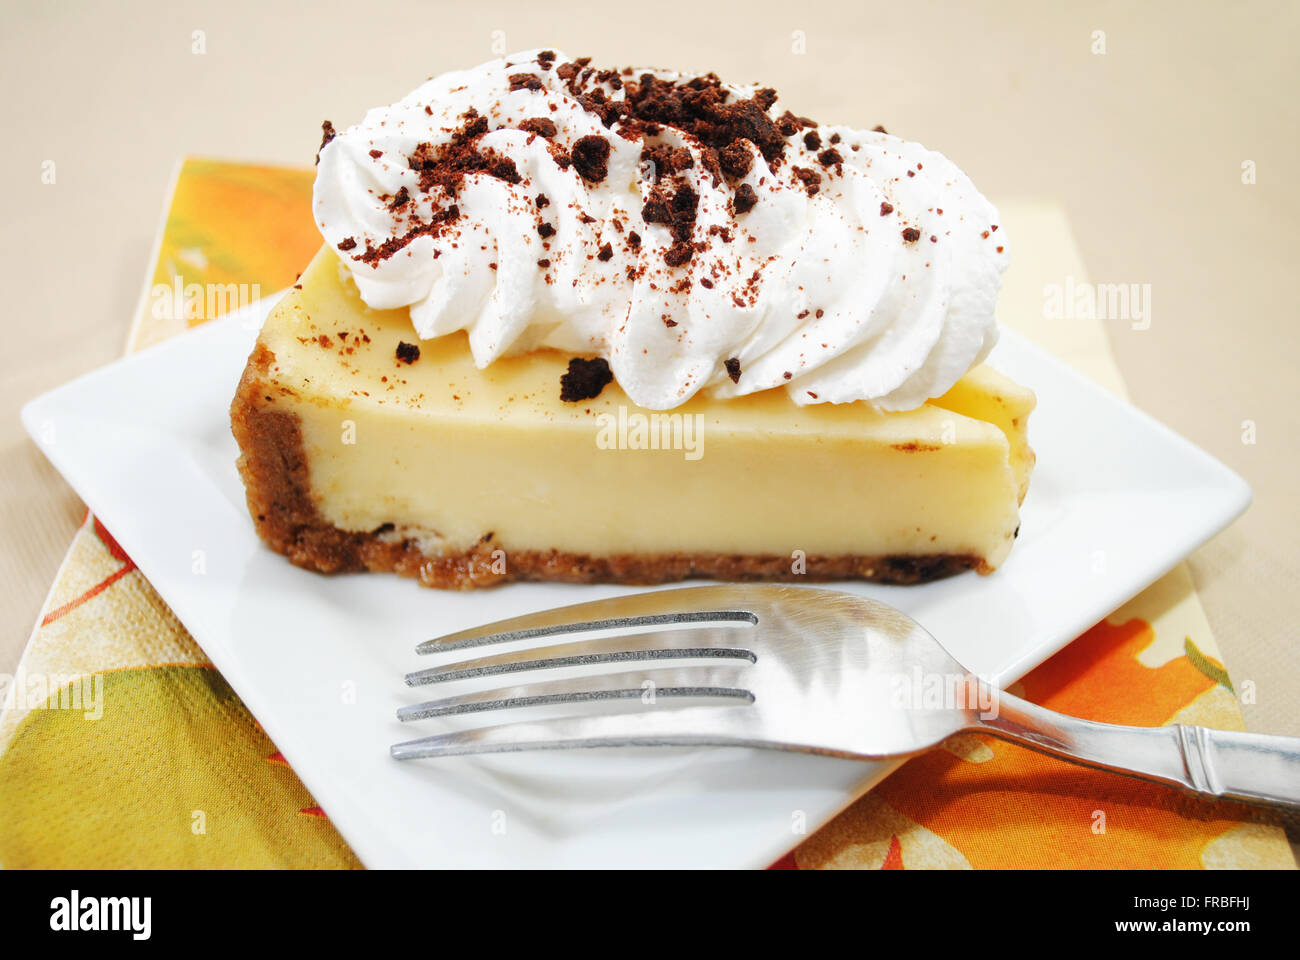 Appetizing Cheesecake Served with Fall Colors Stock Photo